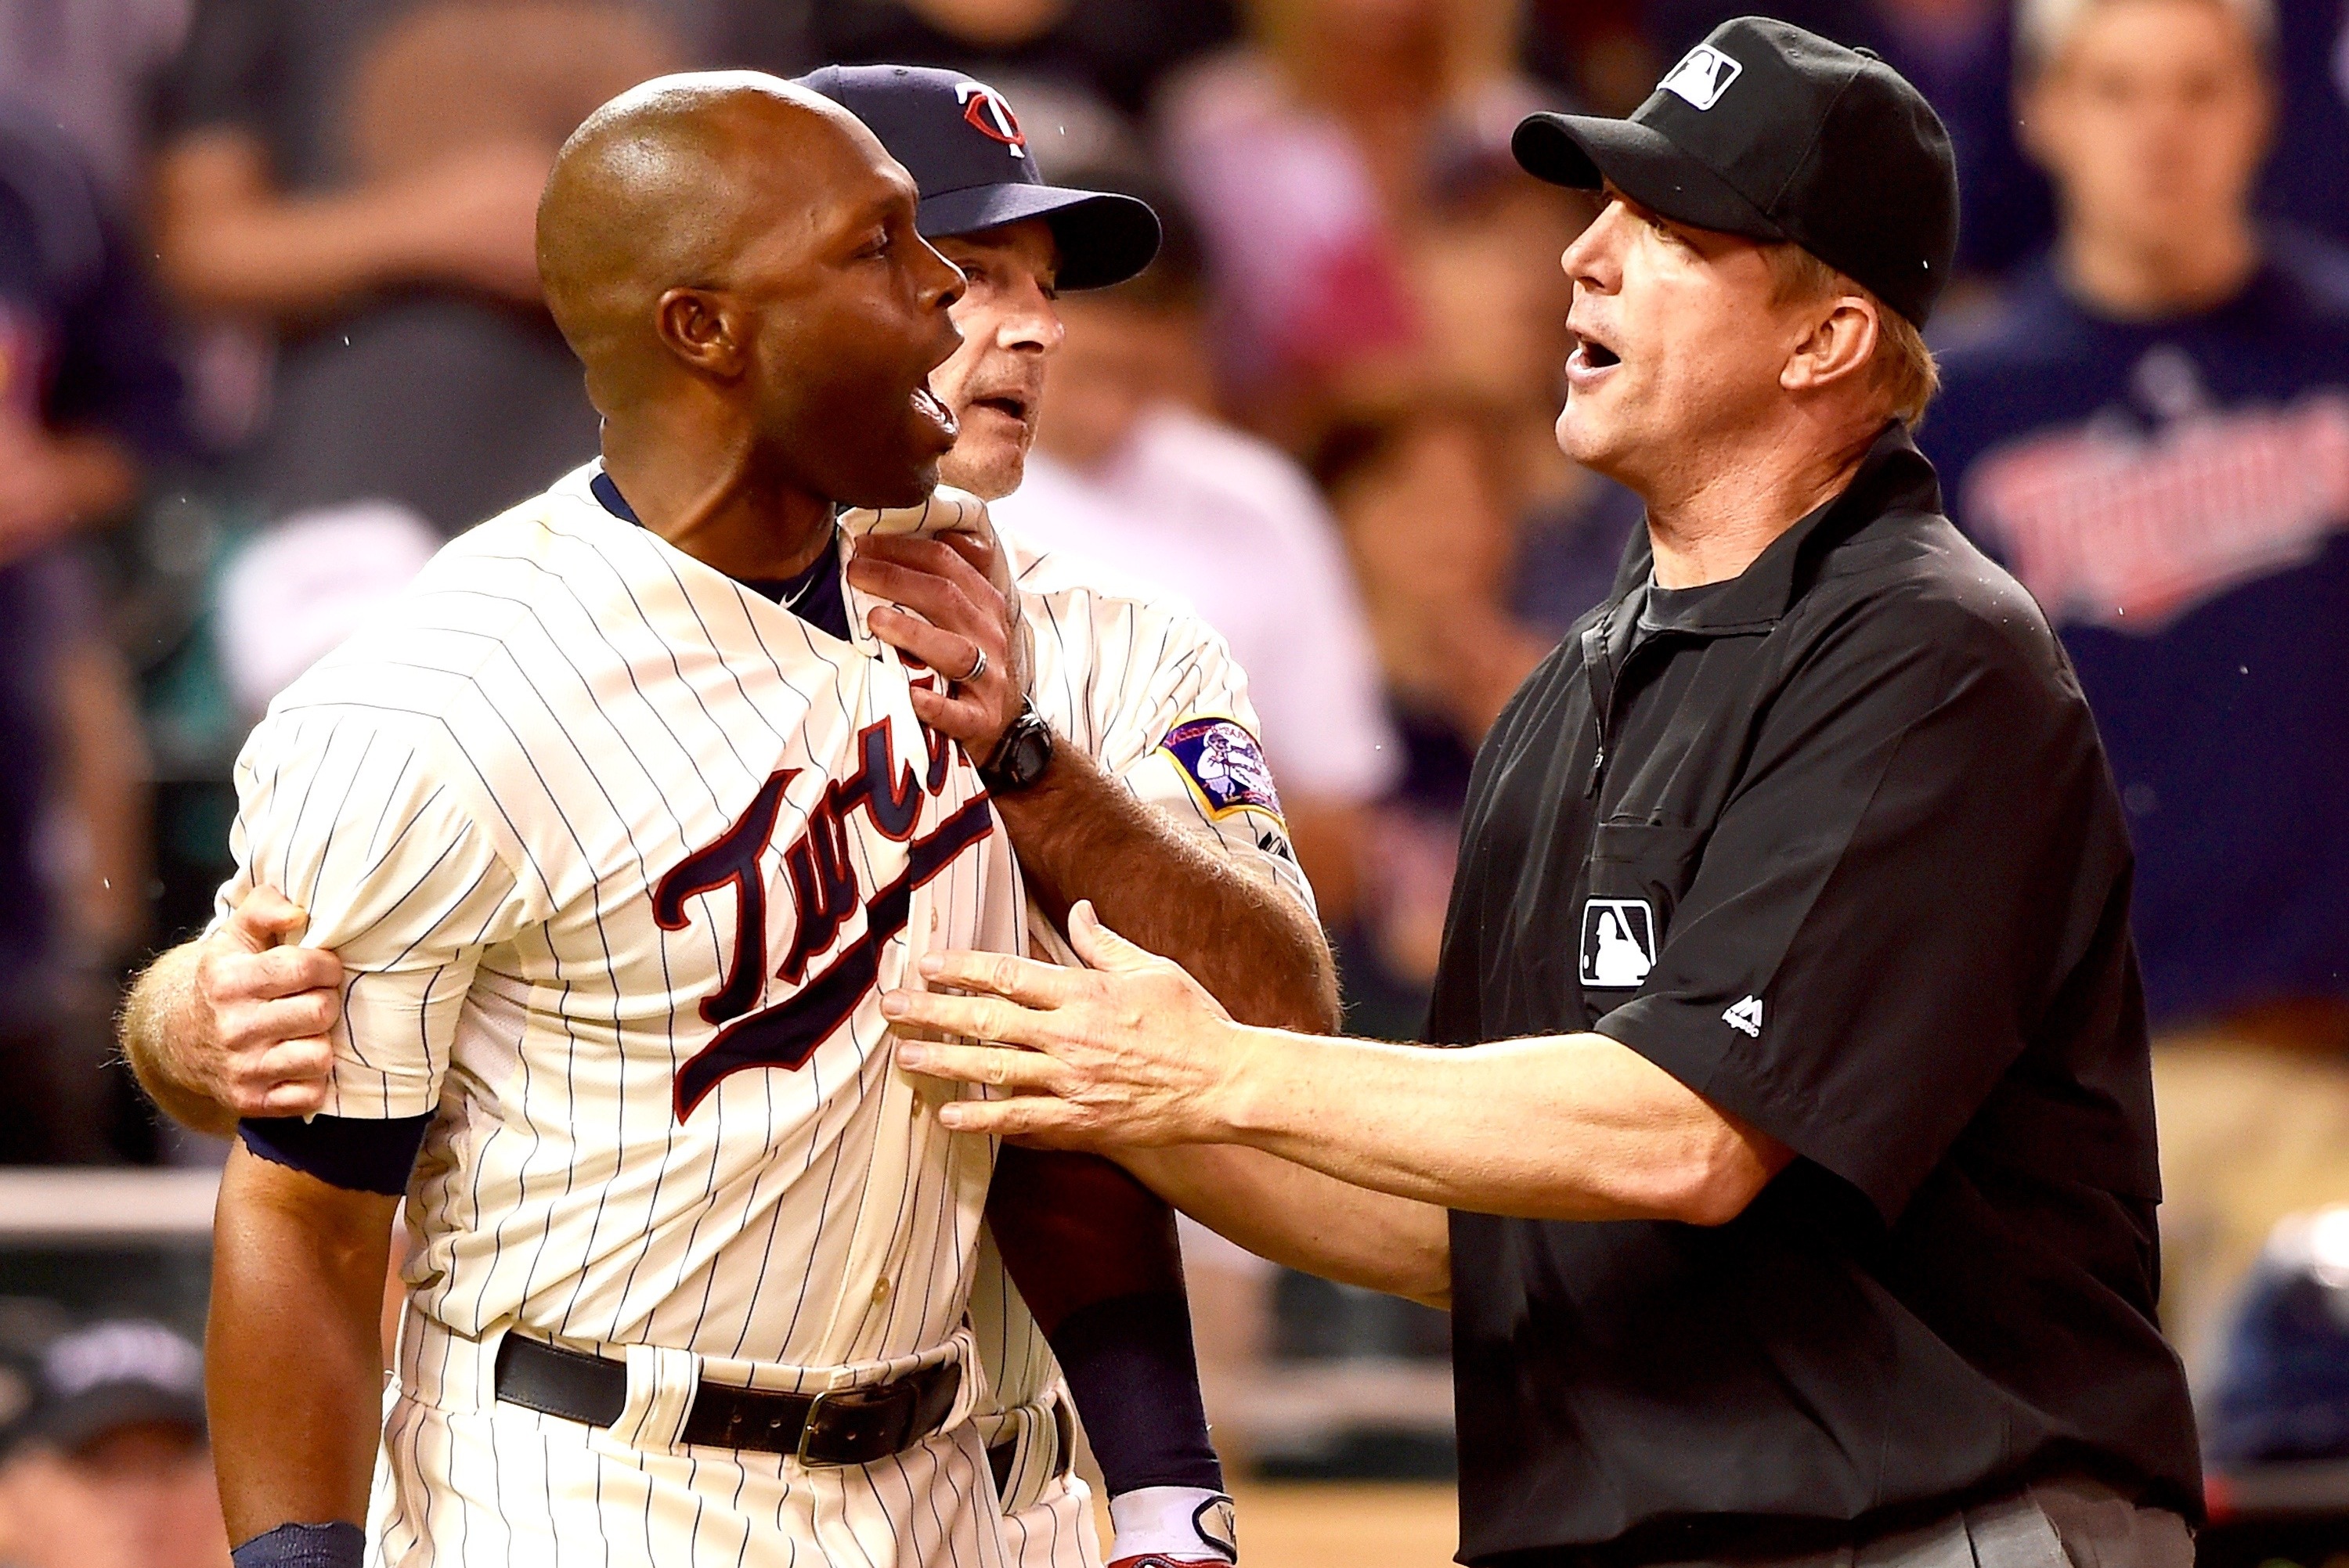 Torii Hunter and Other Great Baseball Meltdowns - ABC News